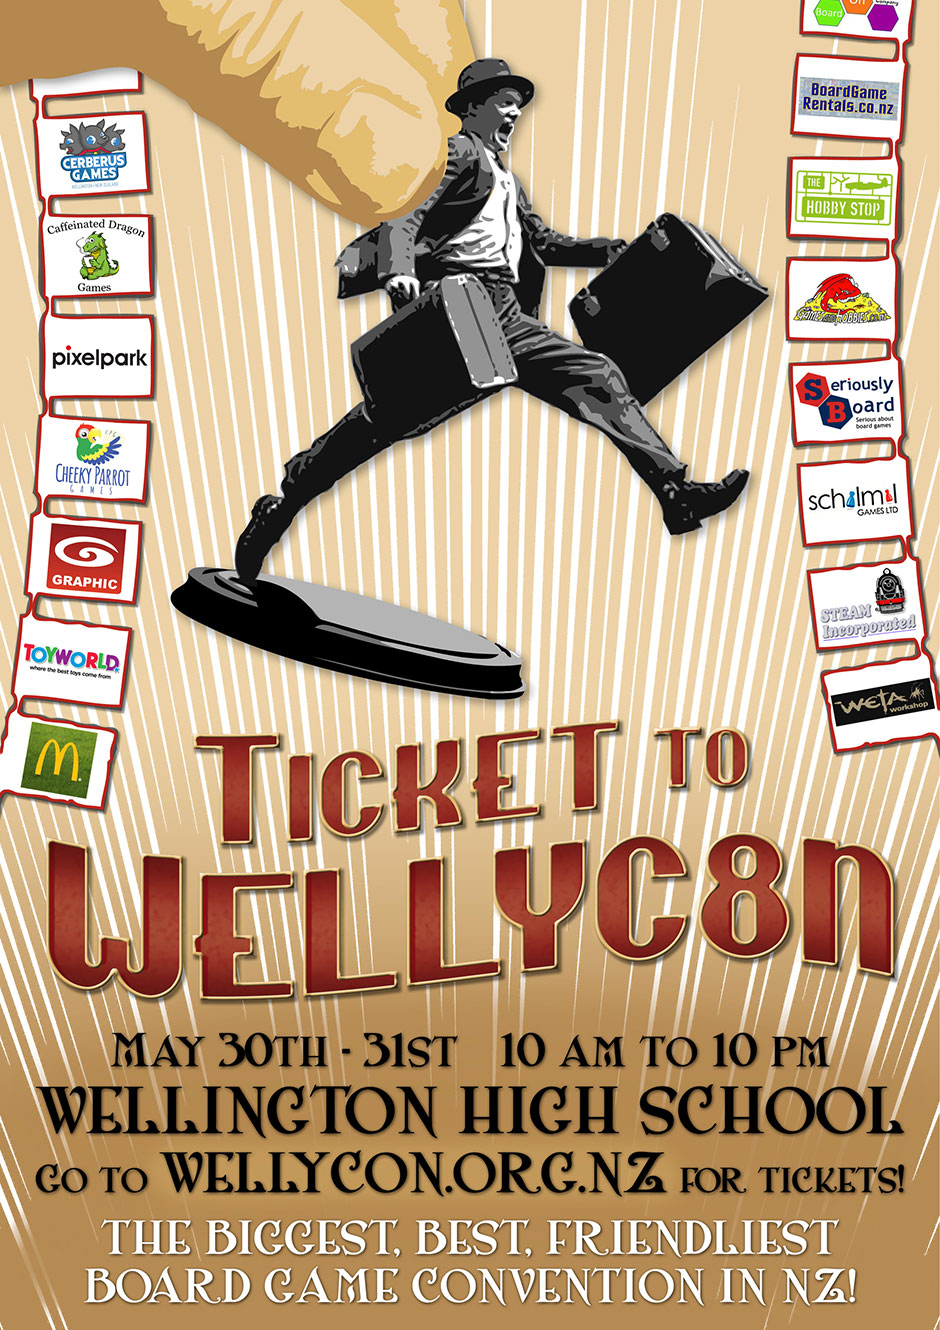 Wellycon 2015